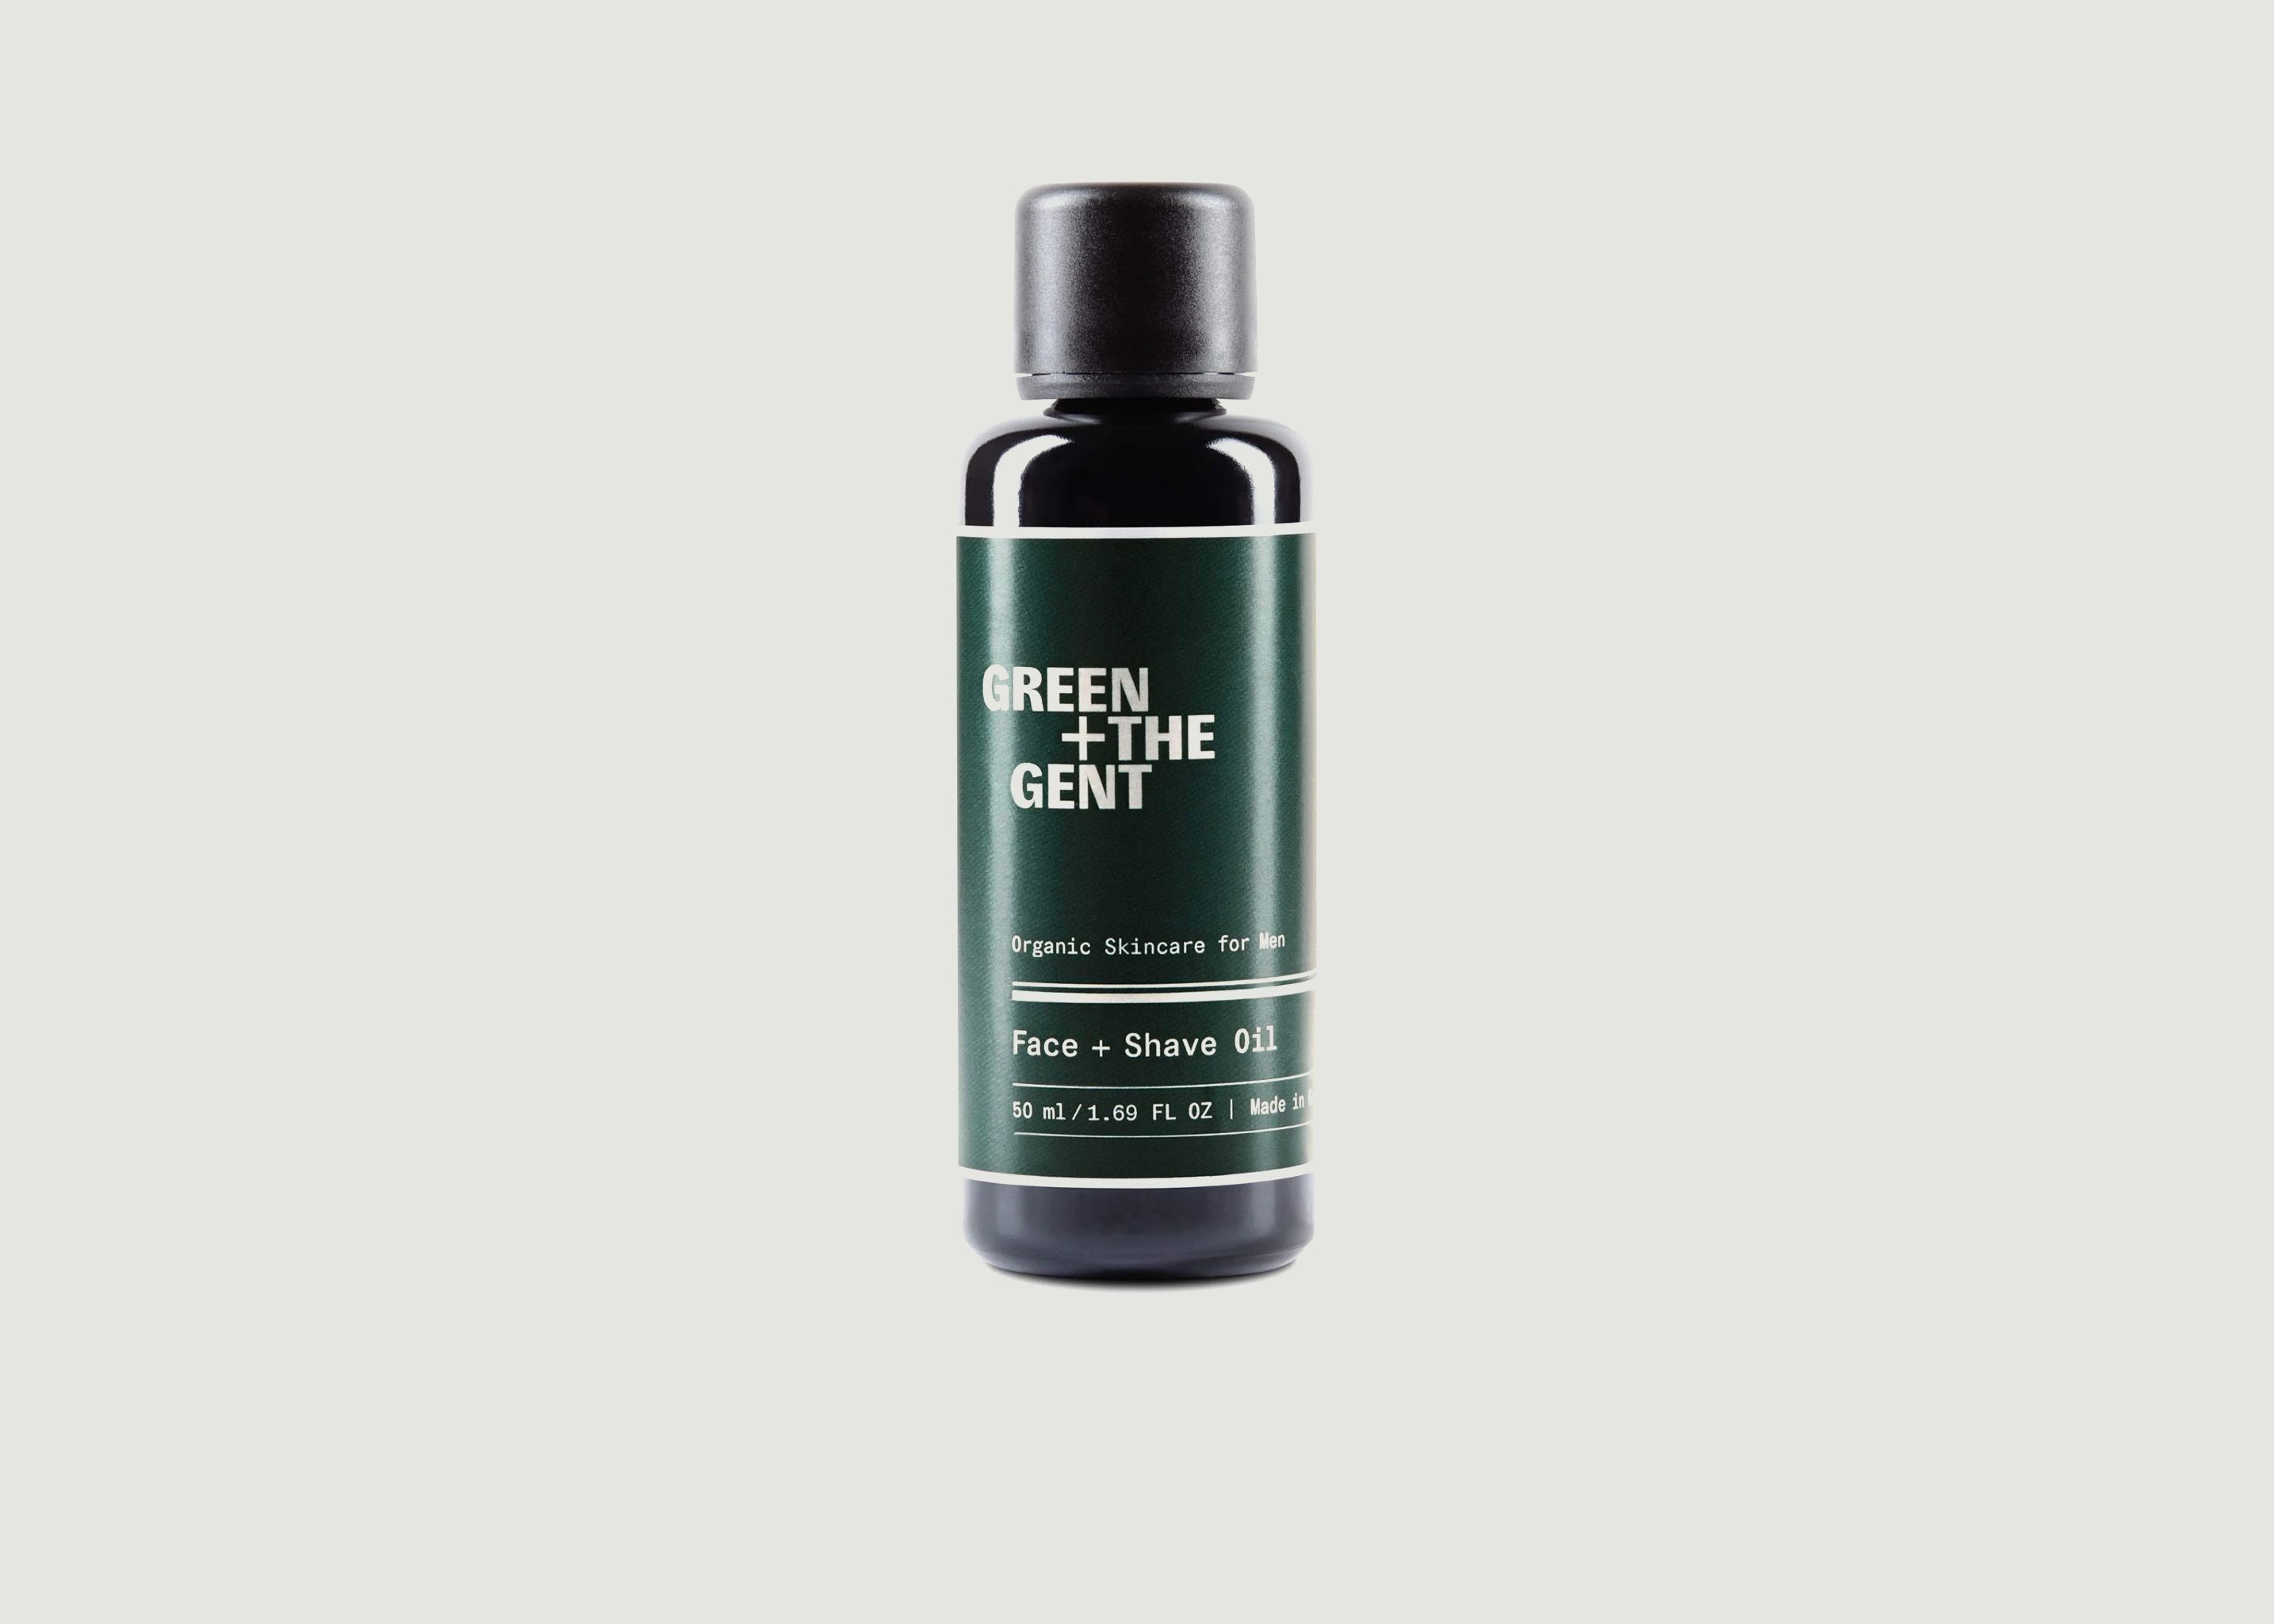 Face and Shave Oil - Green Plus the Gent